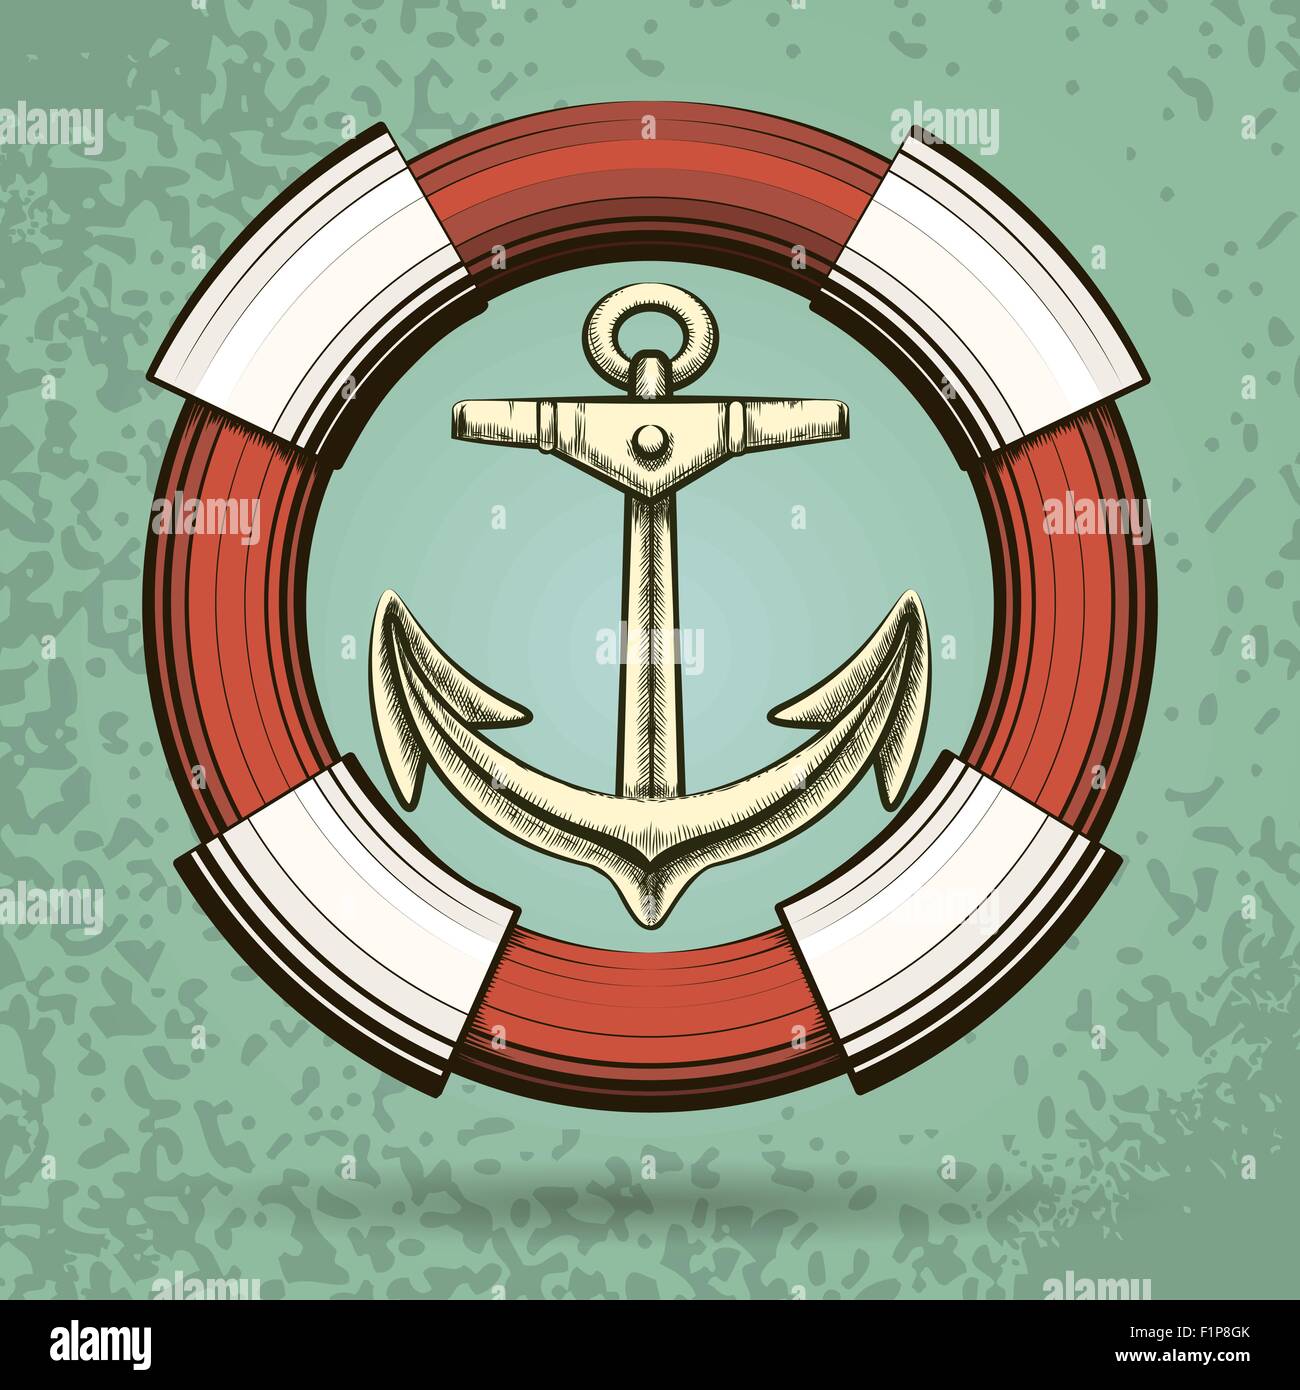 Anchor and Lifebuoy in retro style. Colorful illustration. Stock Vector